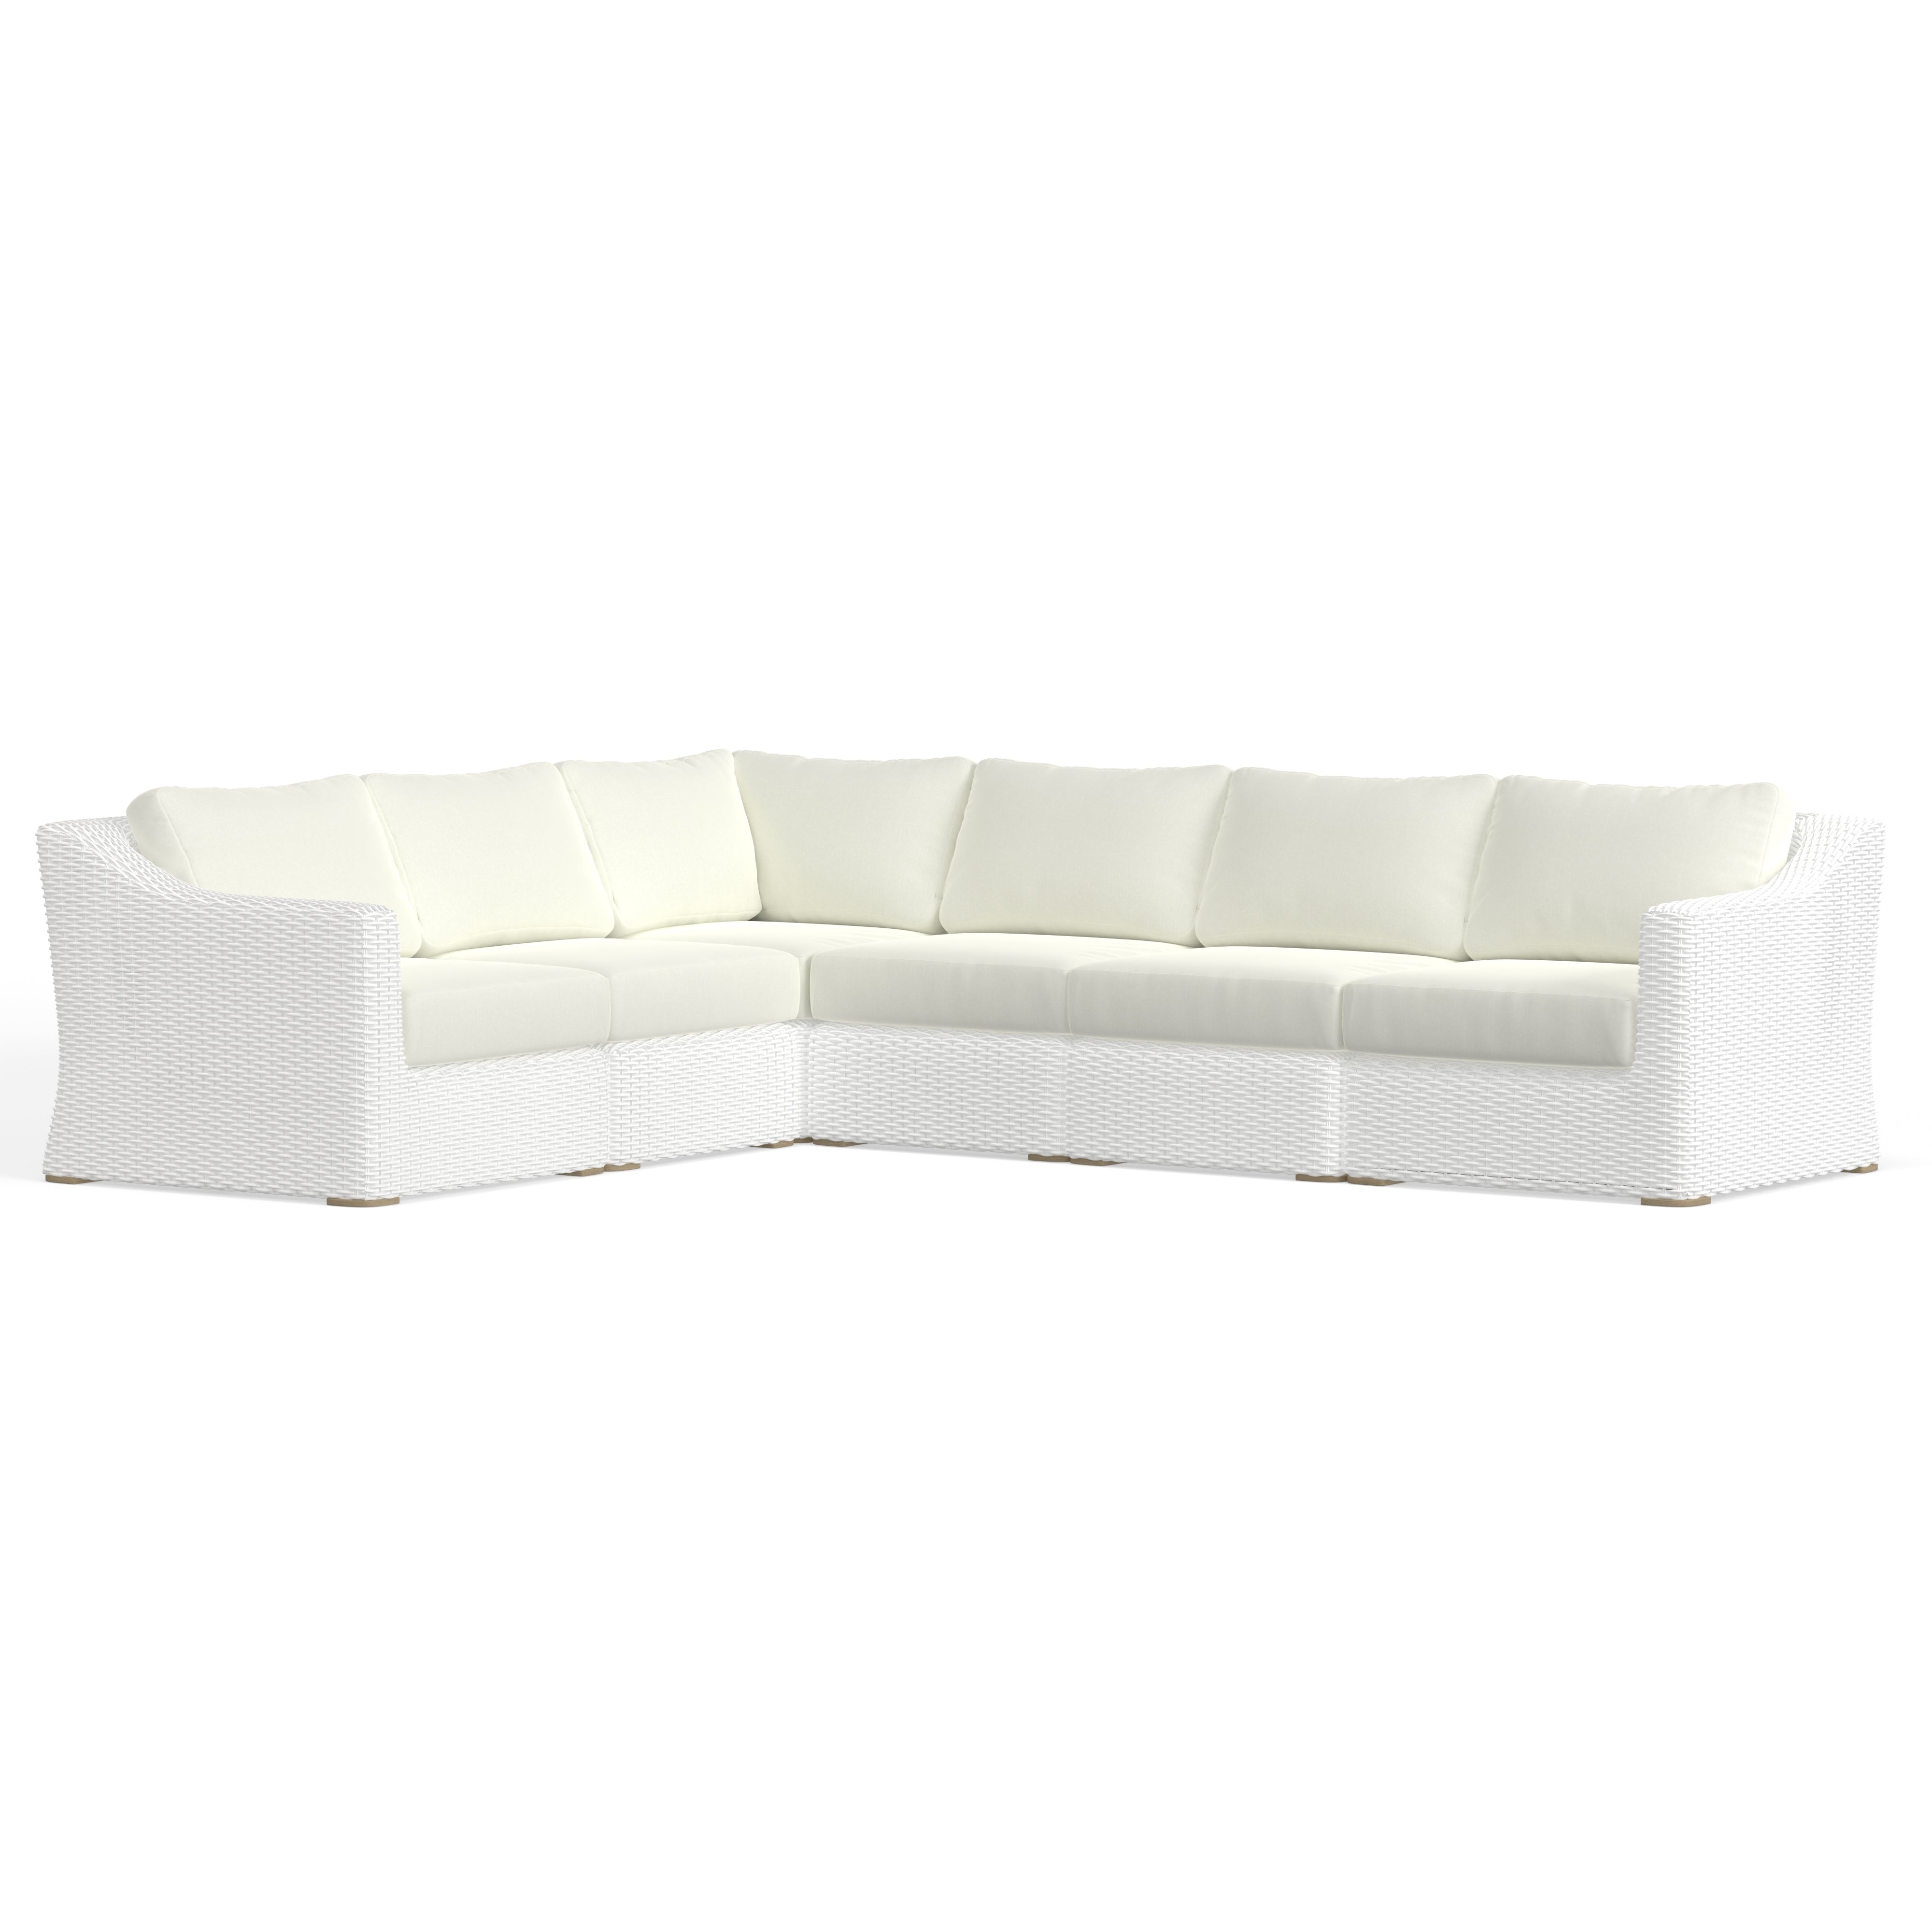 Best Outdoor Sectional For 6